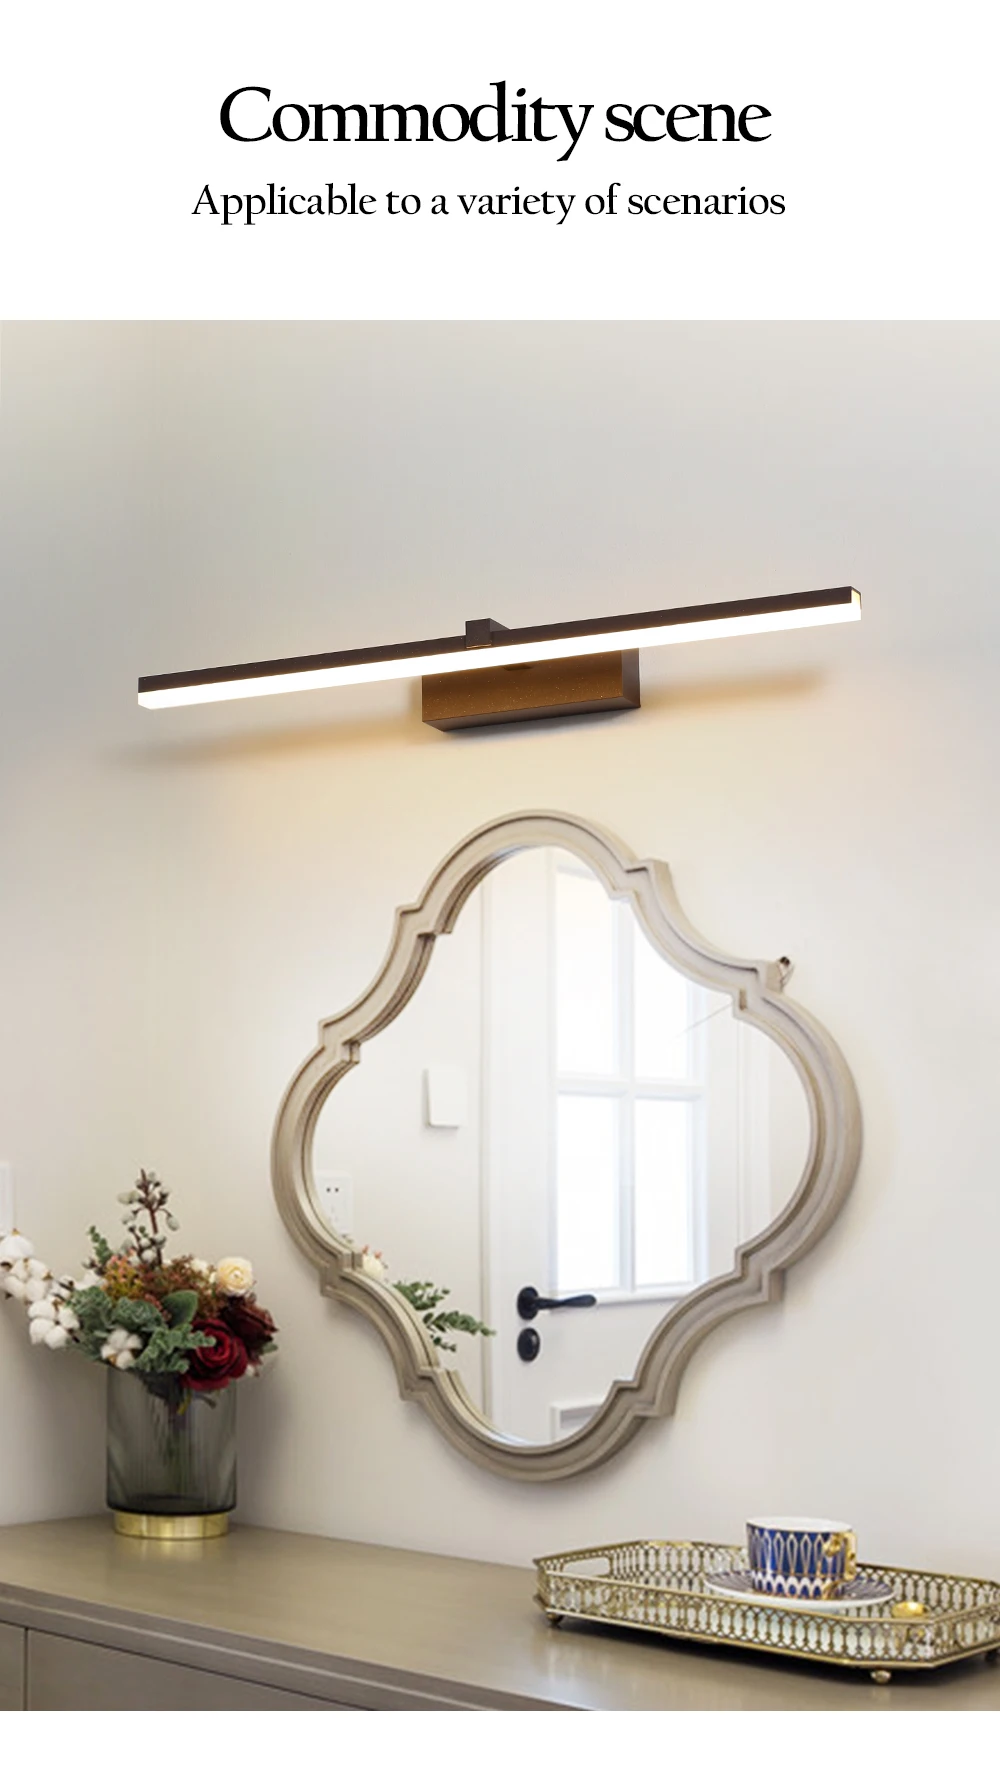 bathroom wall lights Modern Mirror Light Picture Light Decor Long Led Wall Lamp For Bathroom Living Room Wall Sconce Light Brown White Silver Golden wall mounted bedside lights